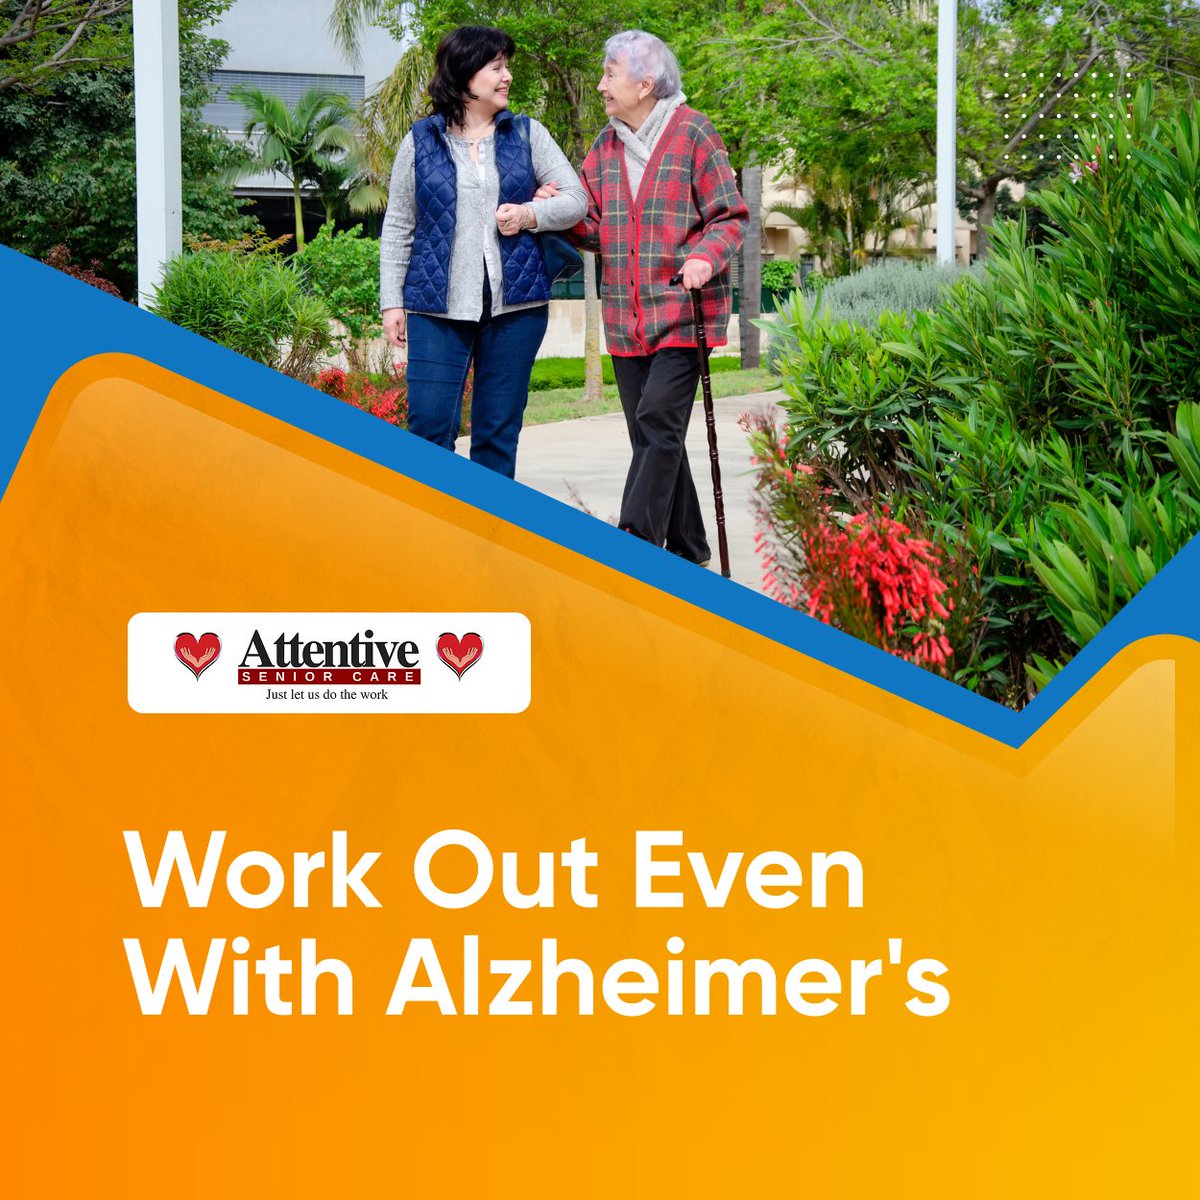 We must all strive to keep our minds and bodies in good shape. The same can be true for Alzheimer's patients. Read more: facebook.com/permalink.php?… #StayHealthy #StayActive